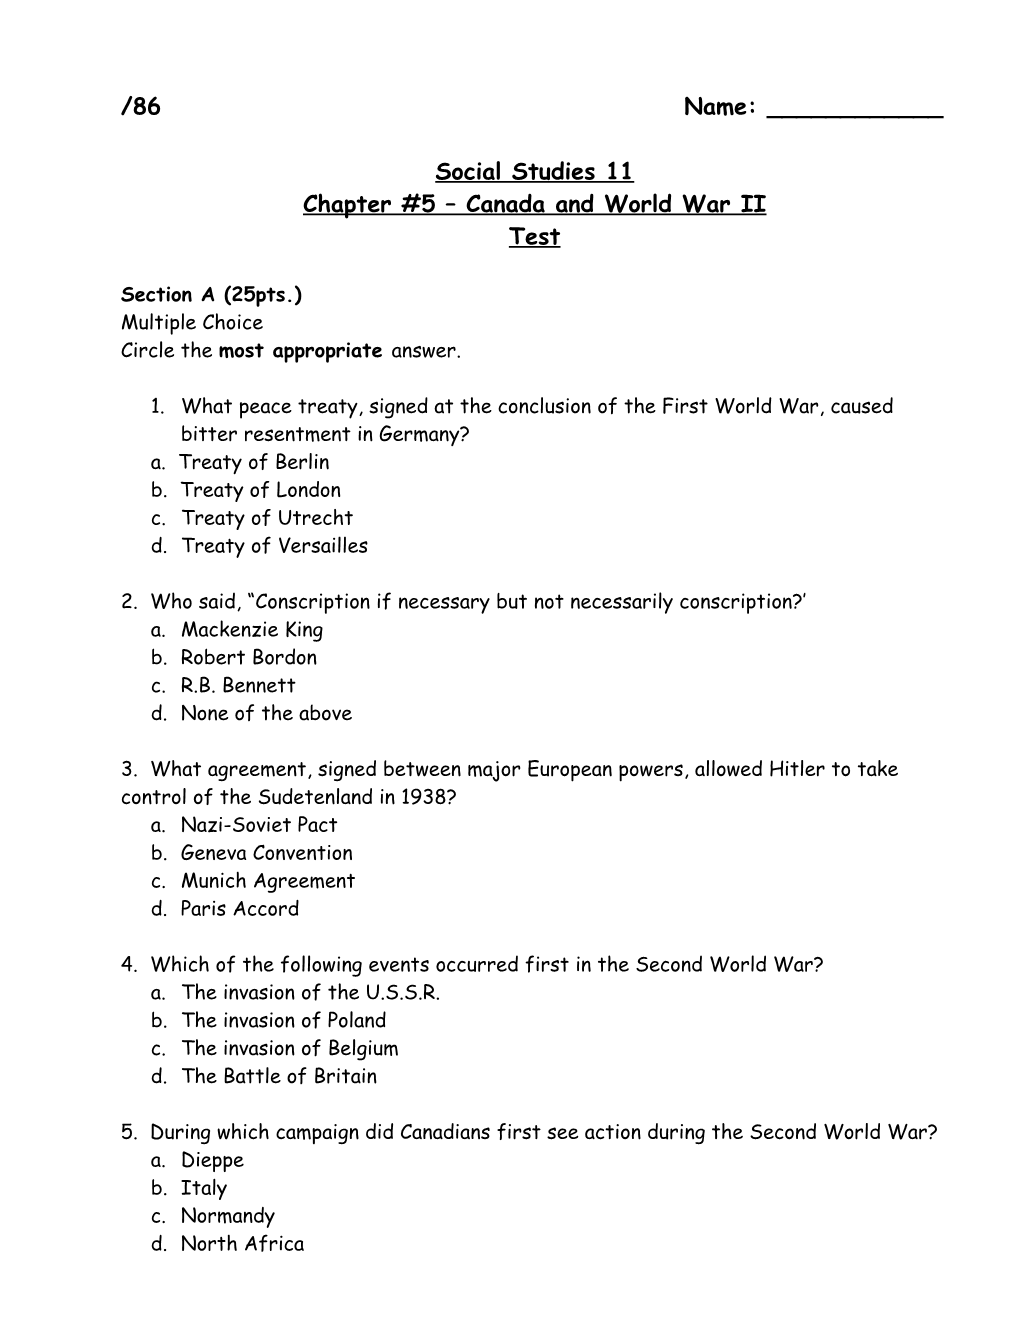 Chapter #5 Canada and World War II